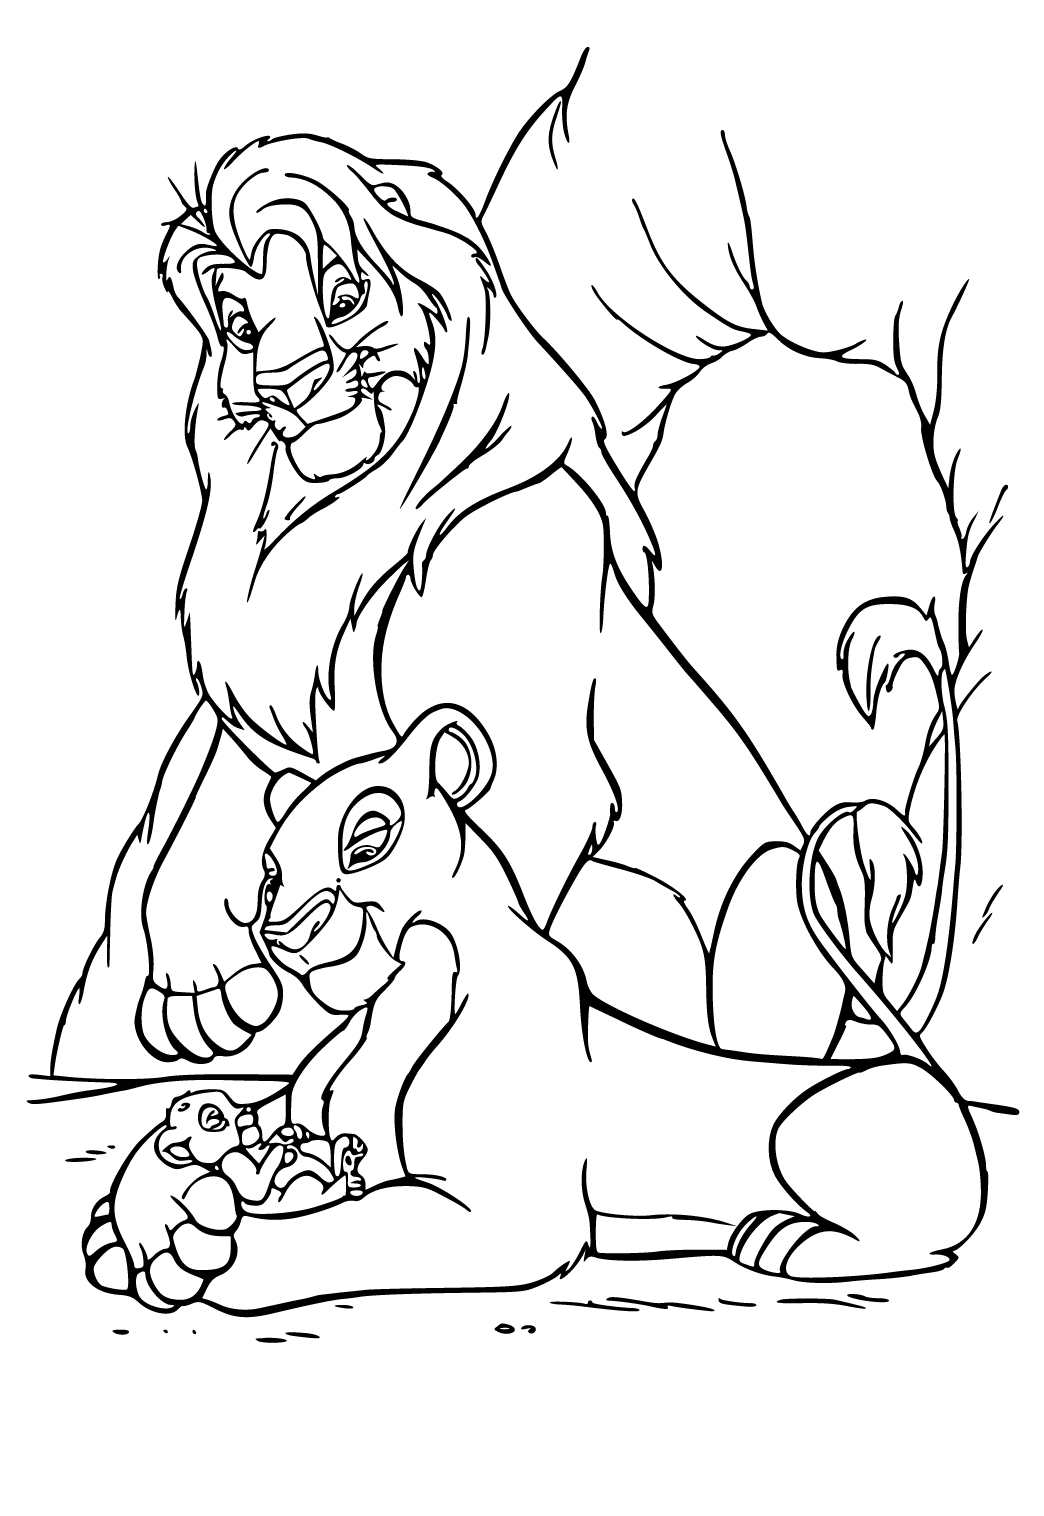 lion king drawing for kids